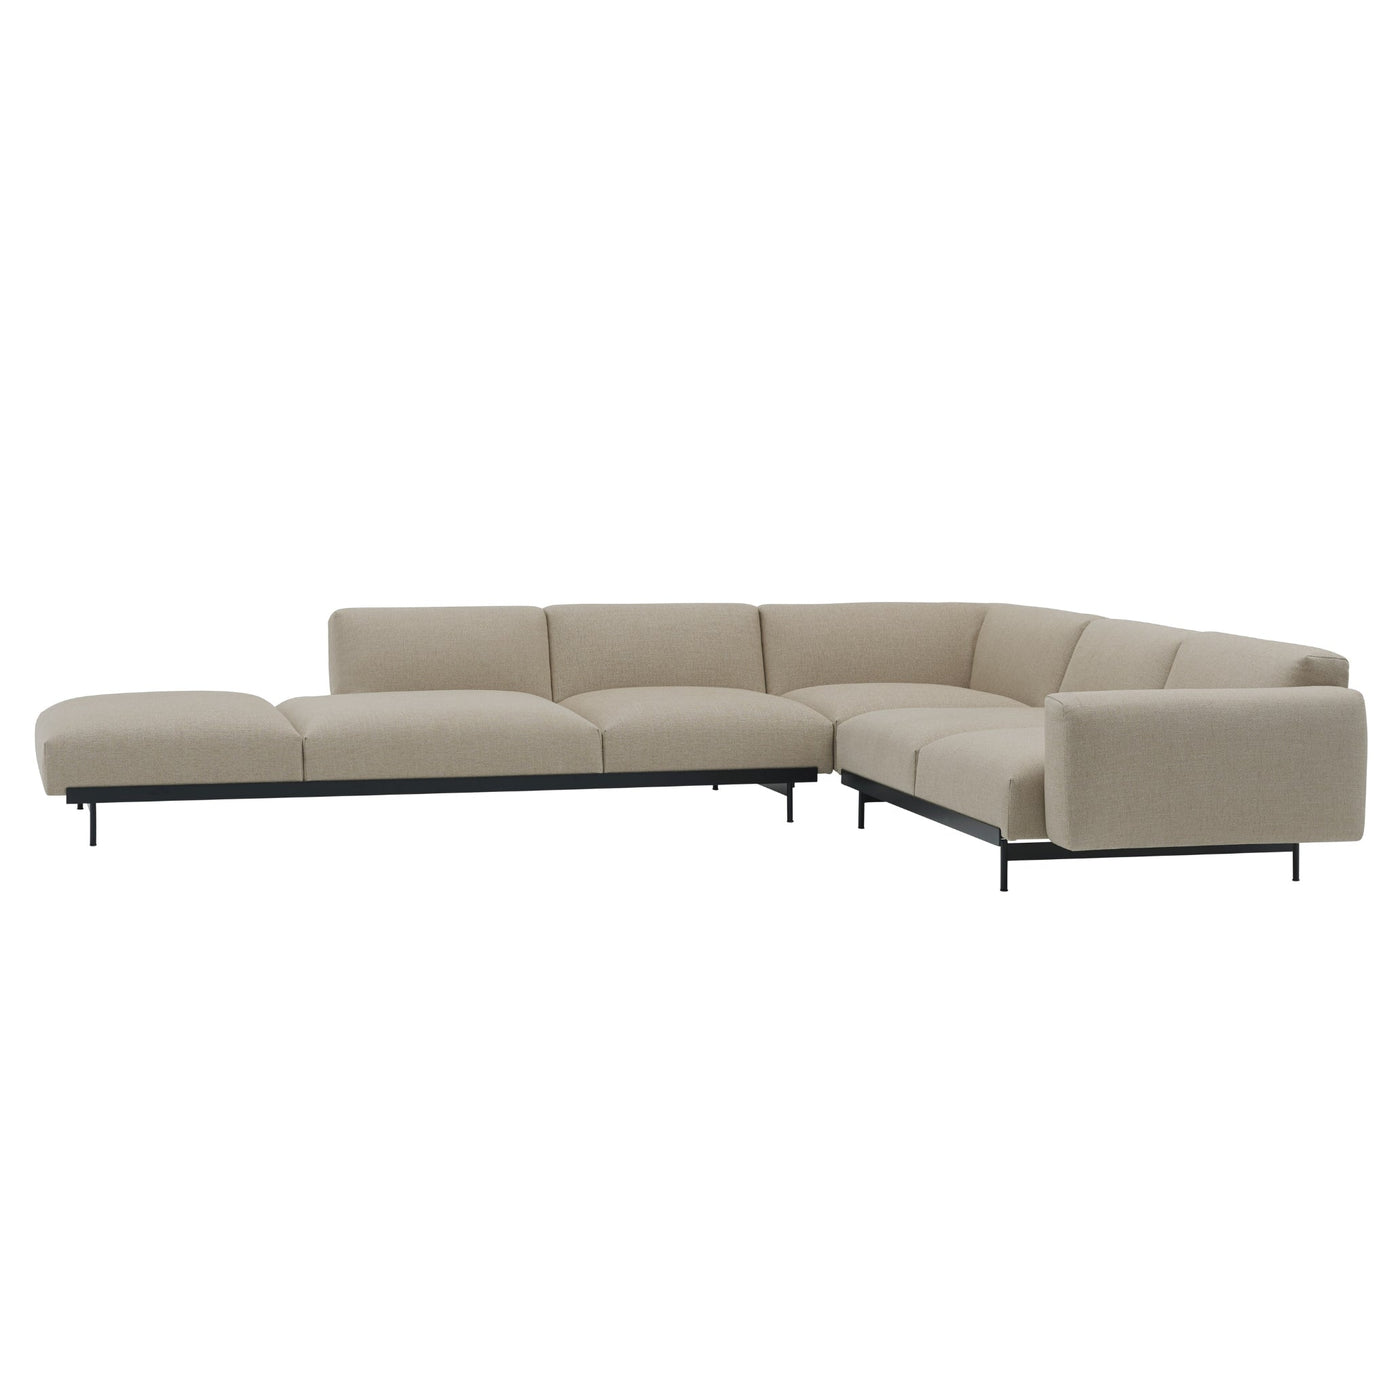 Muuto In Situ Modular Corner Sofa 6. Made to order from someday designs. #colour_ecriture-240